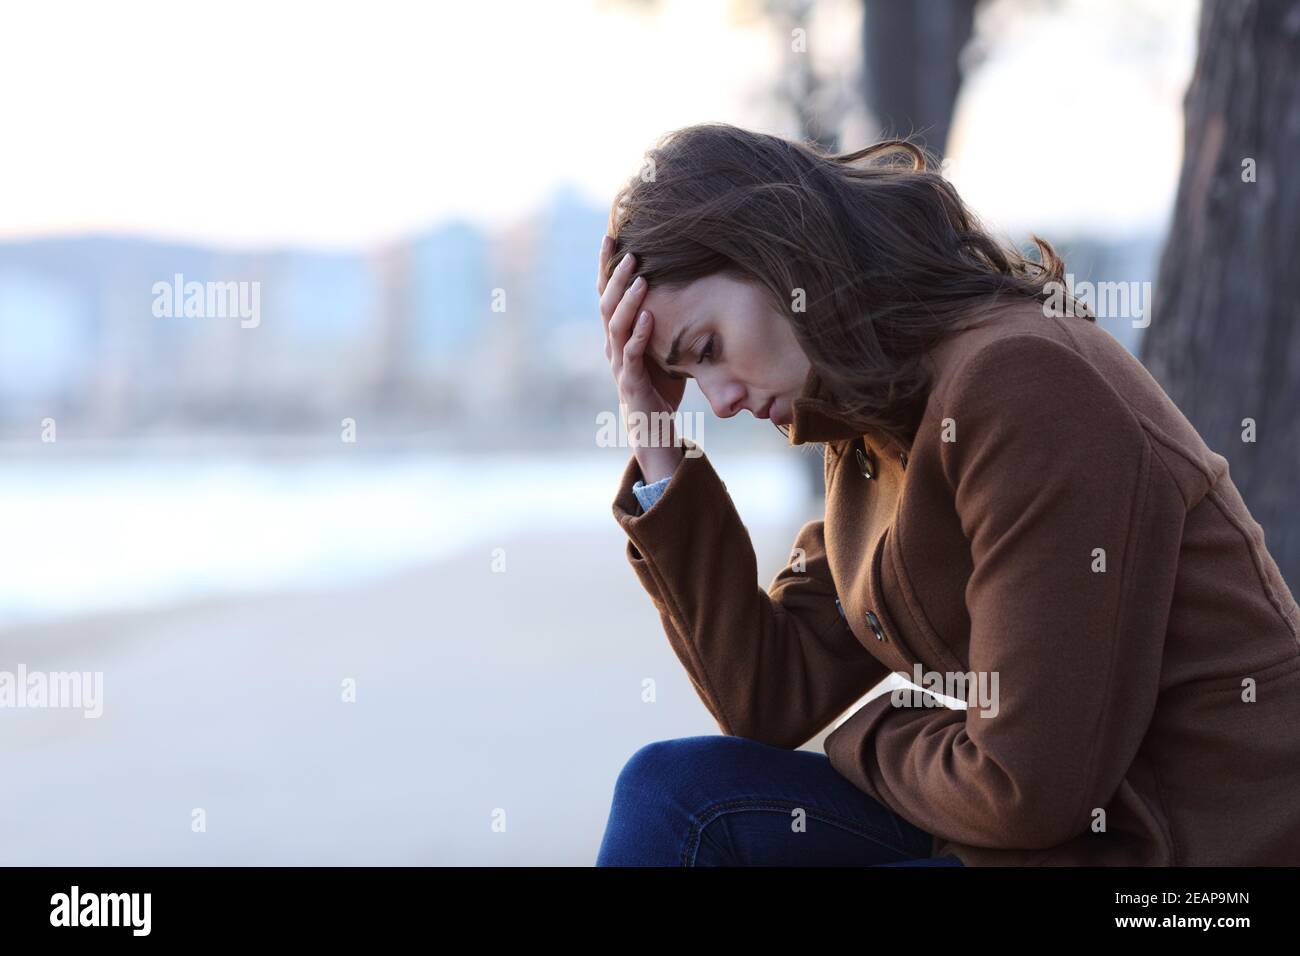 Sad woman complaining on a bench in winter on the beach Stock Photo